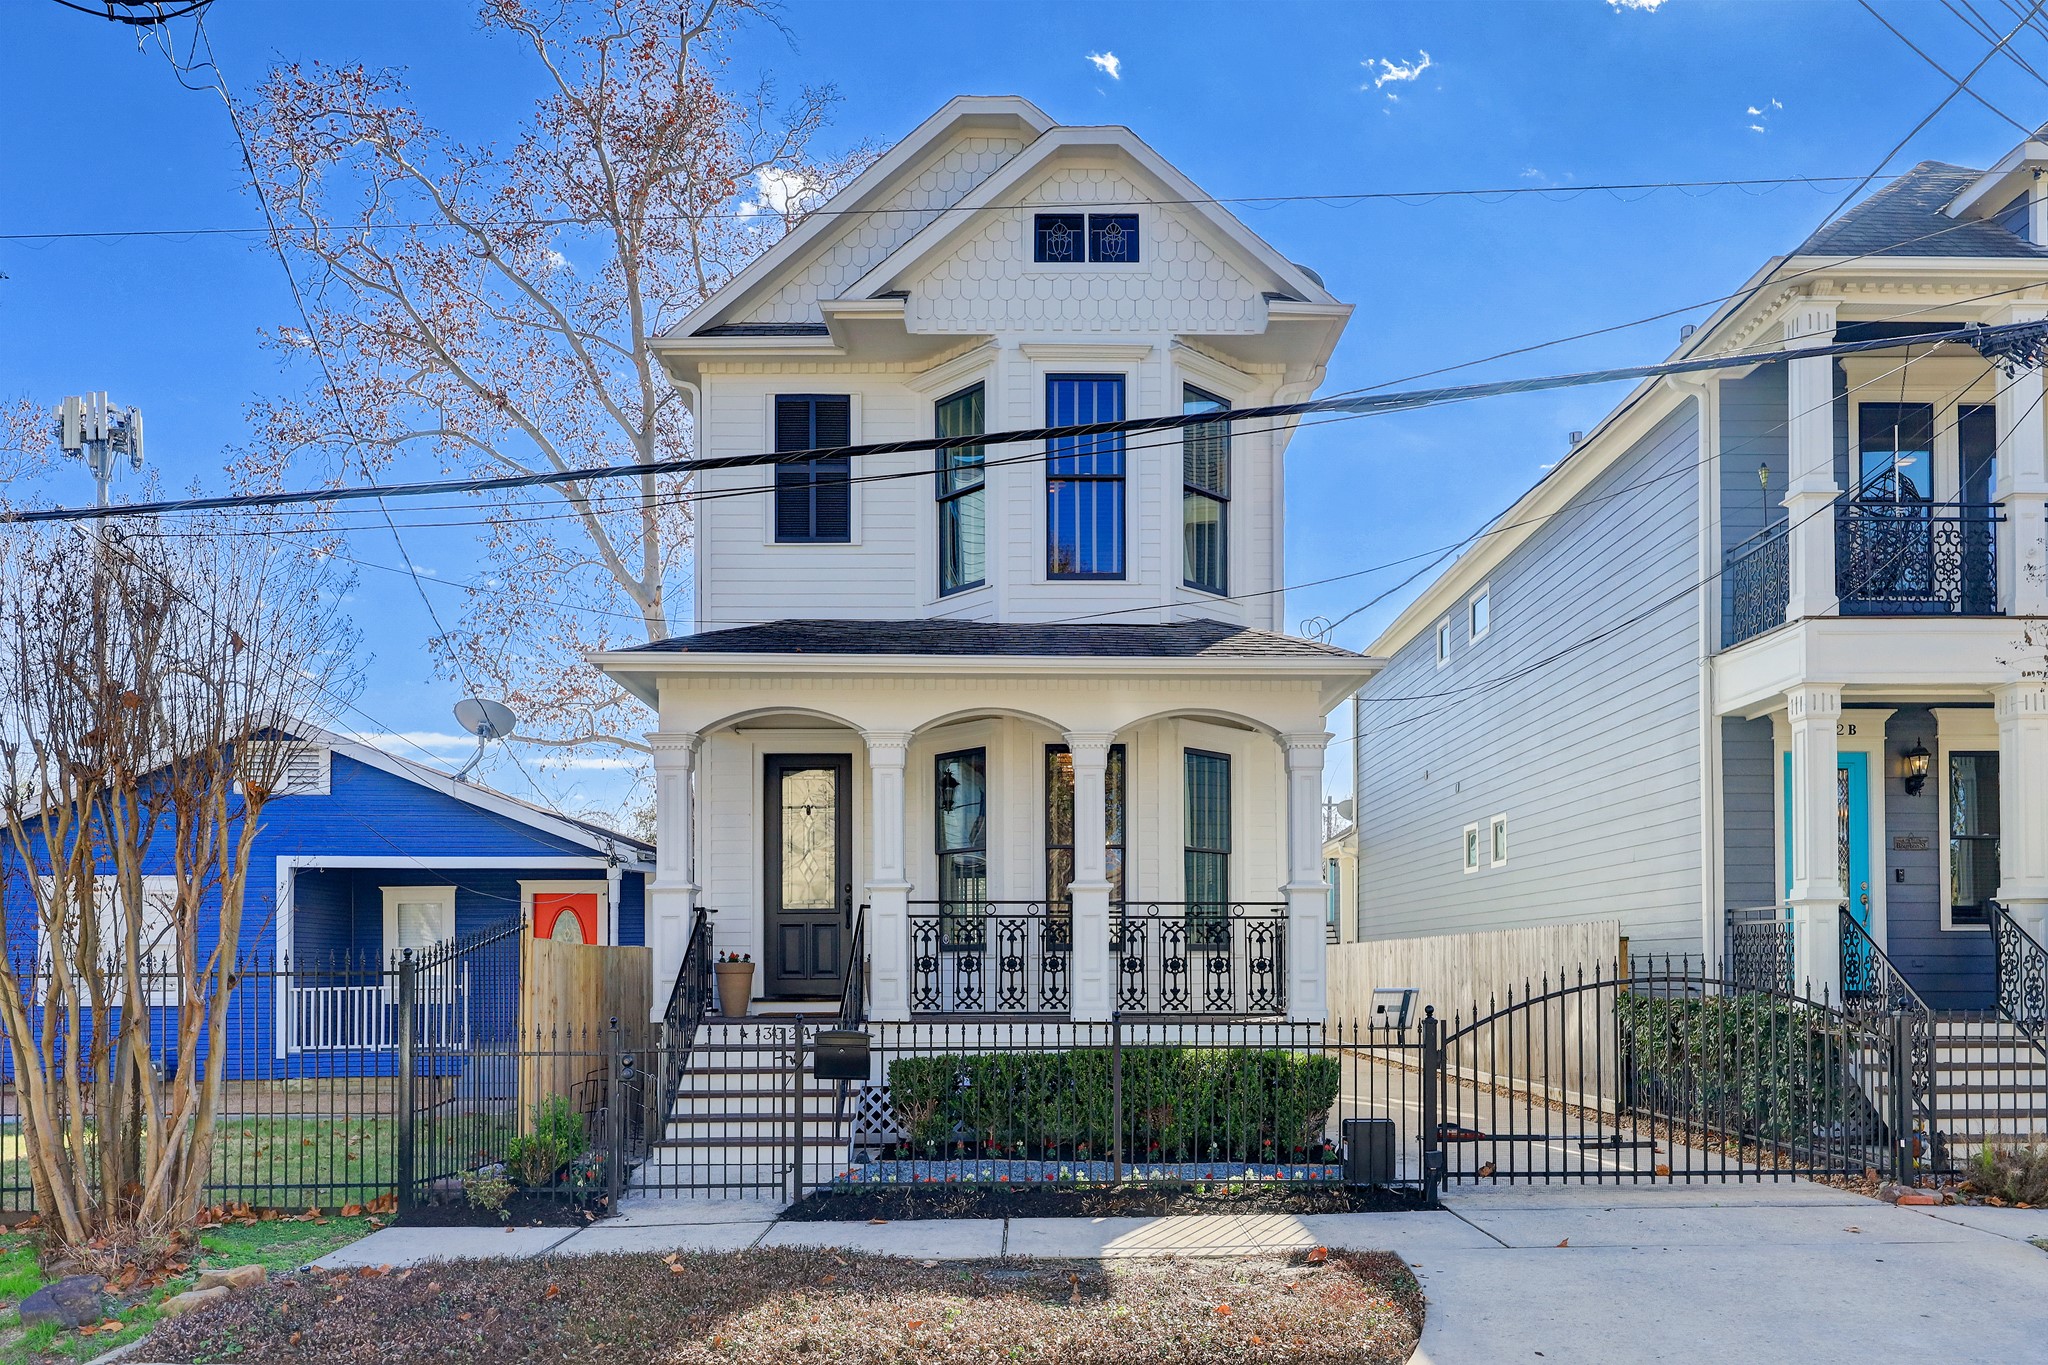 Beautiful New Orleans style home perfectly situated in the Houston Heights!